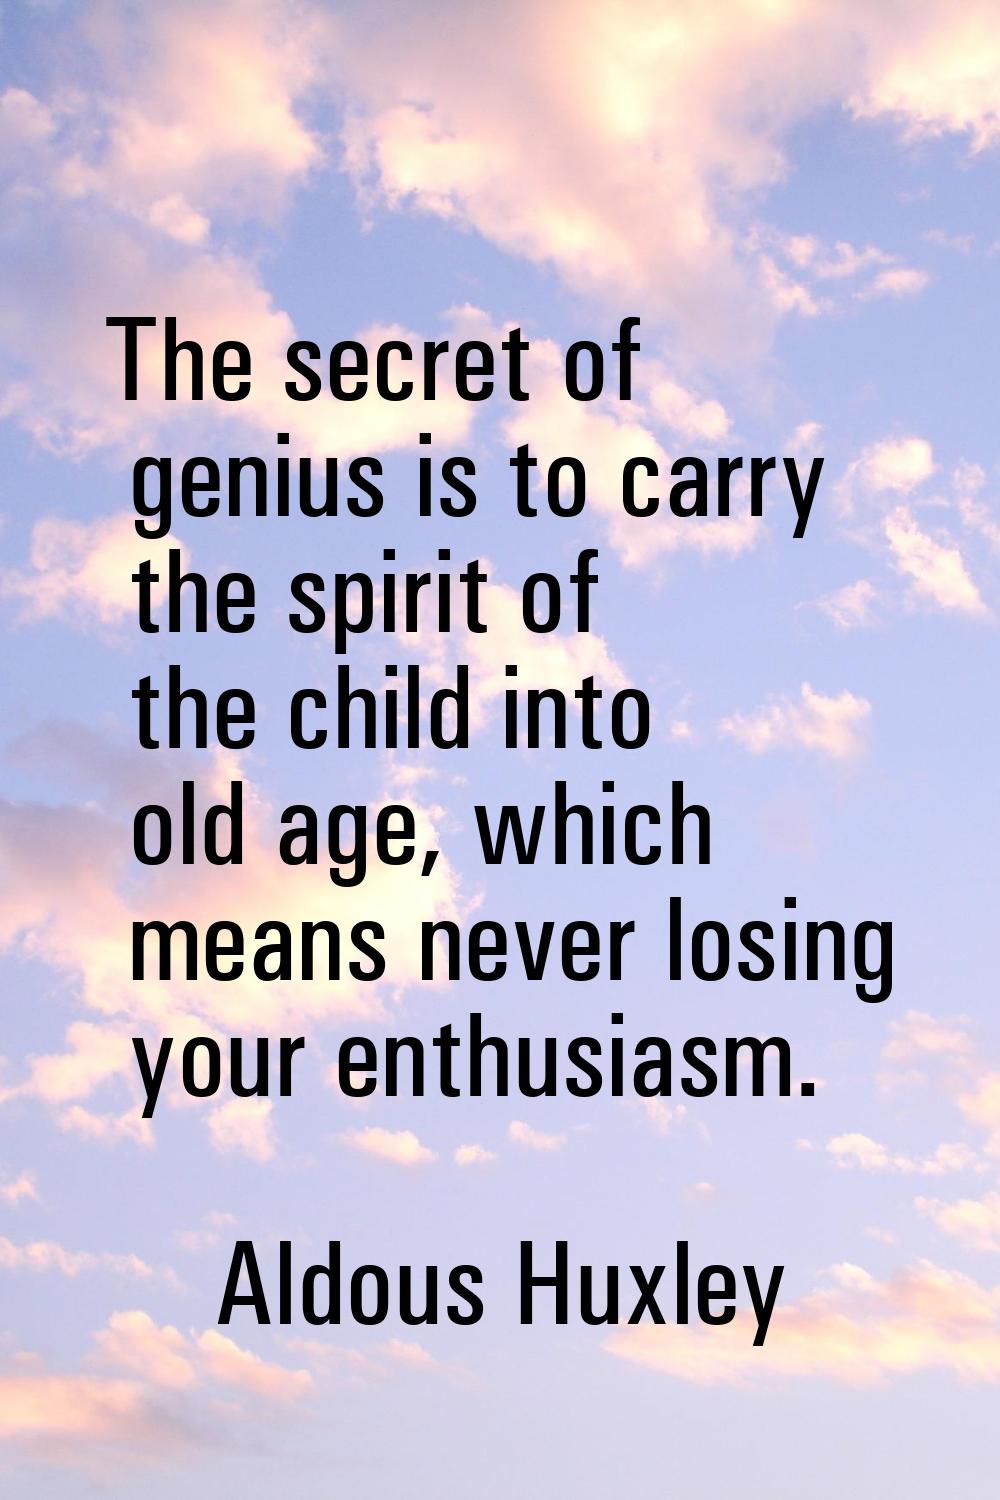 The secret of genius is to carry the spirit of the child into old age, which means never losing you